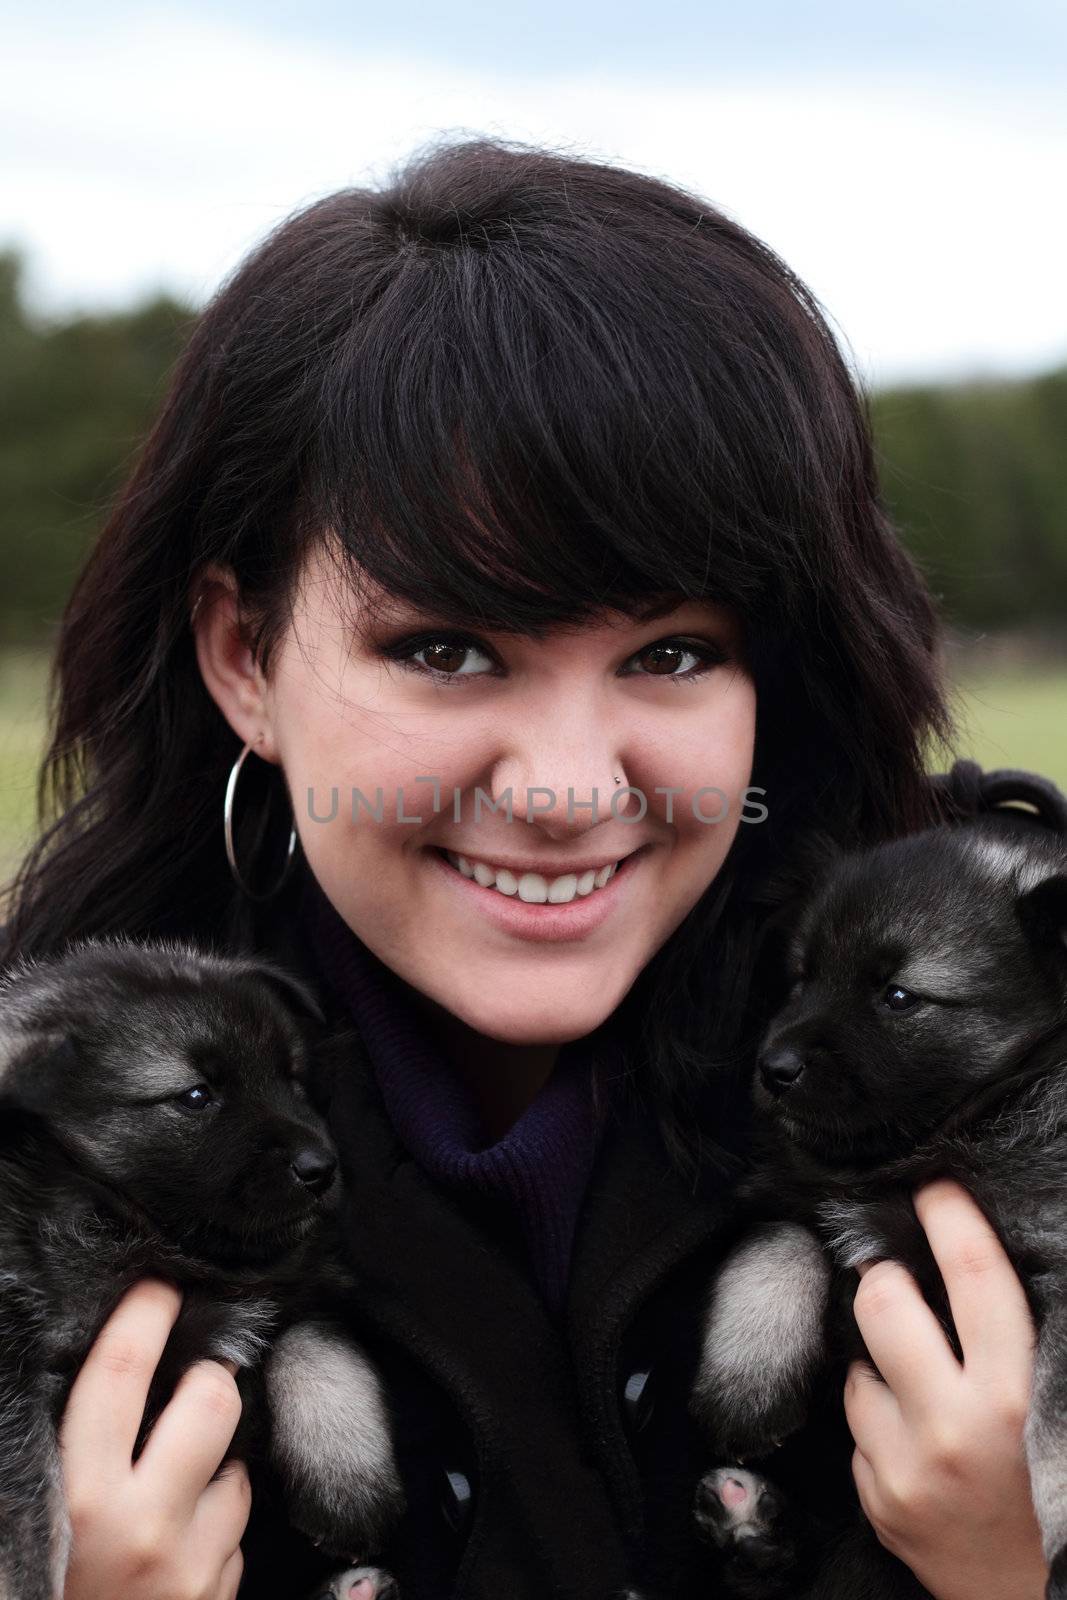 Woman Holding Puppies by StephanieFrey